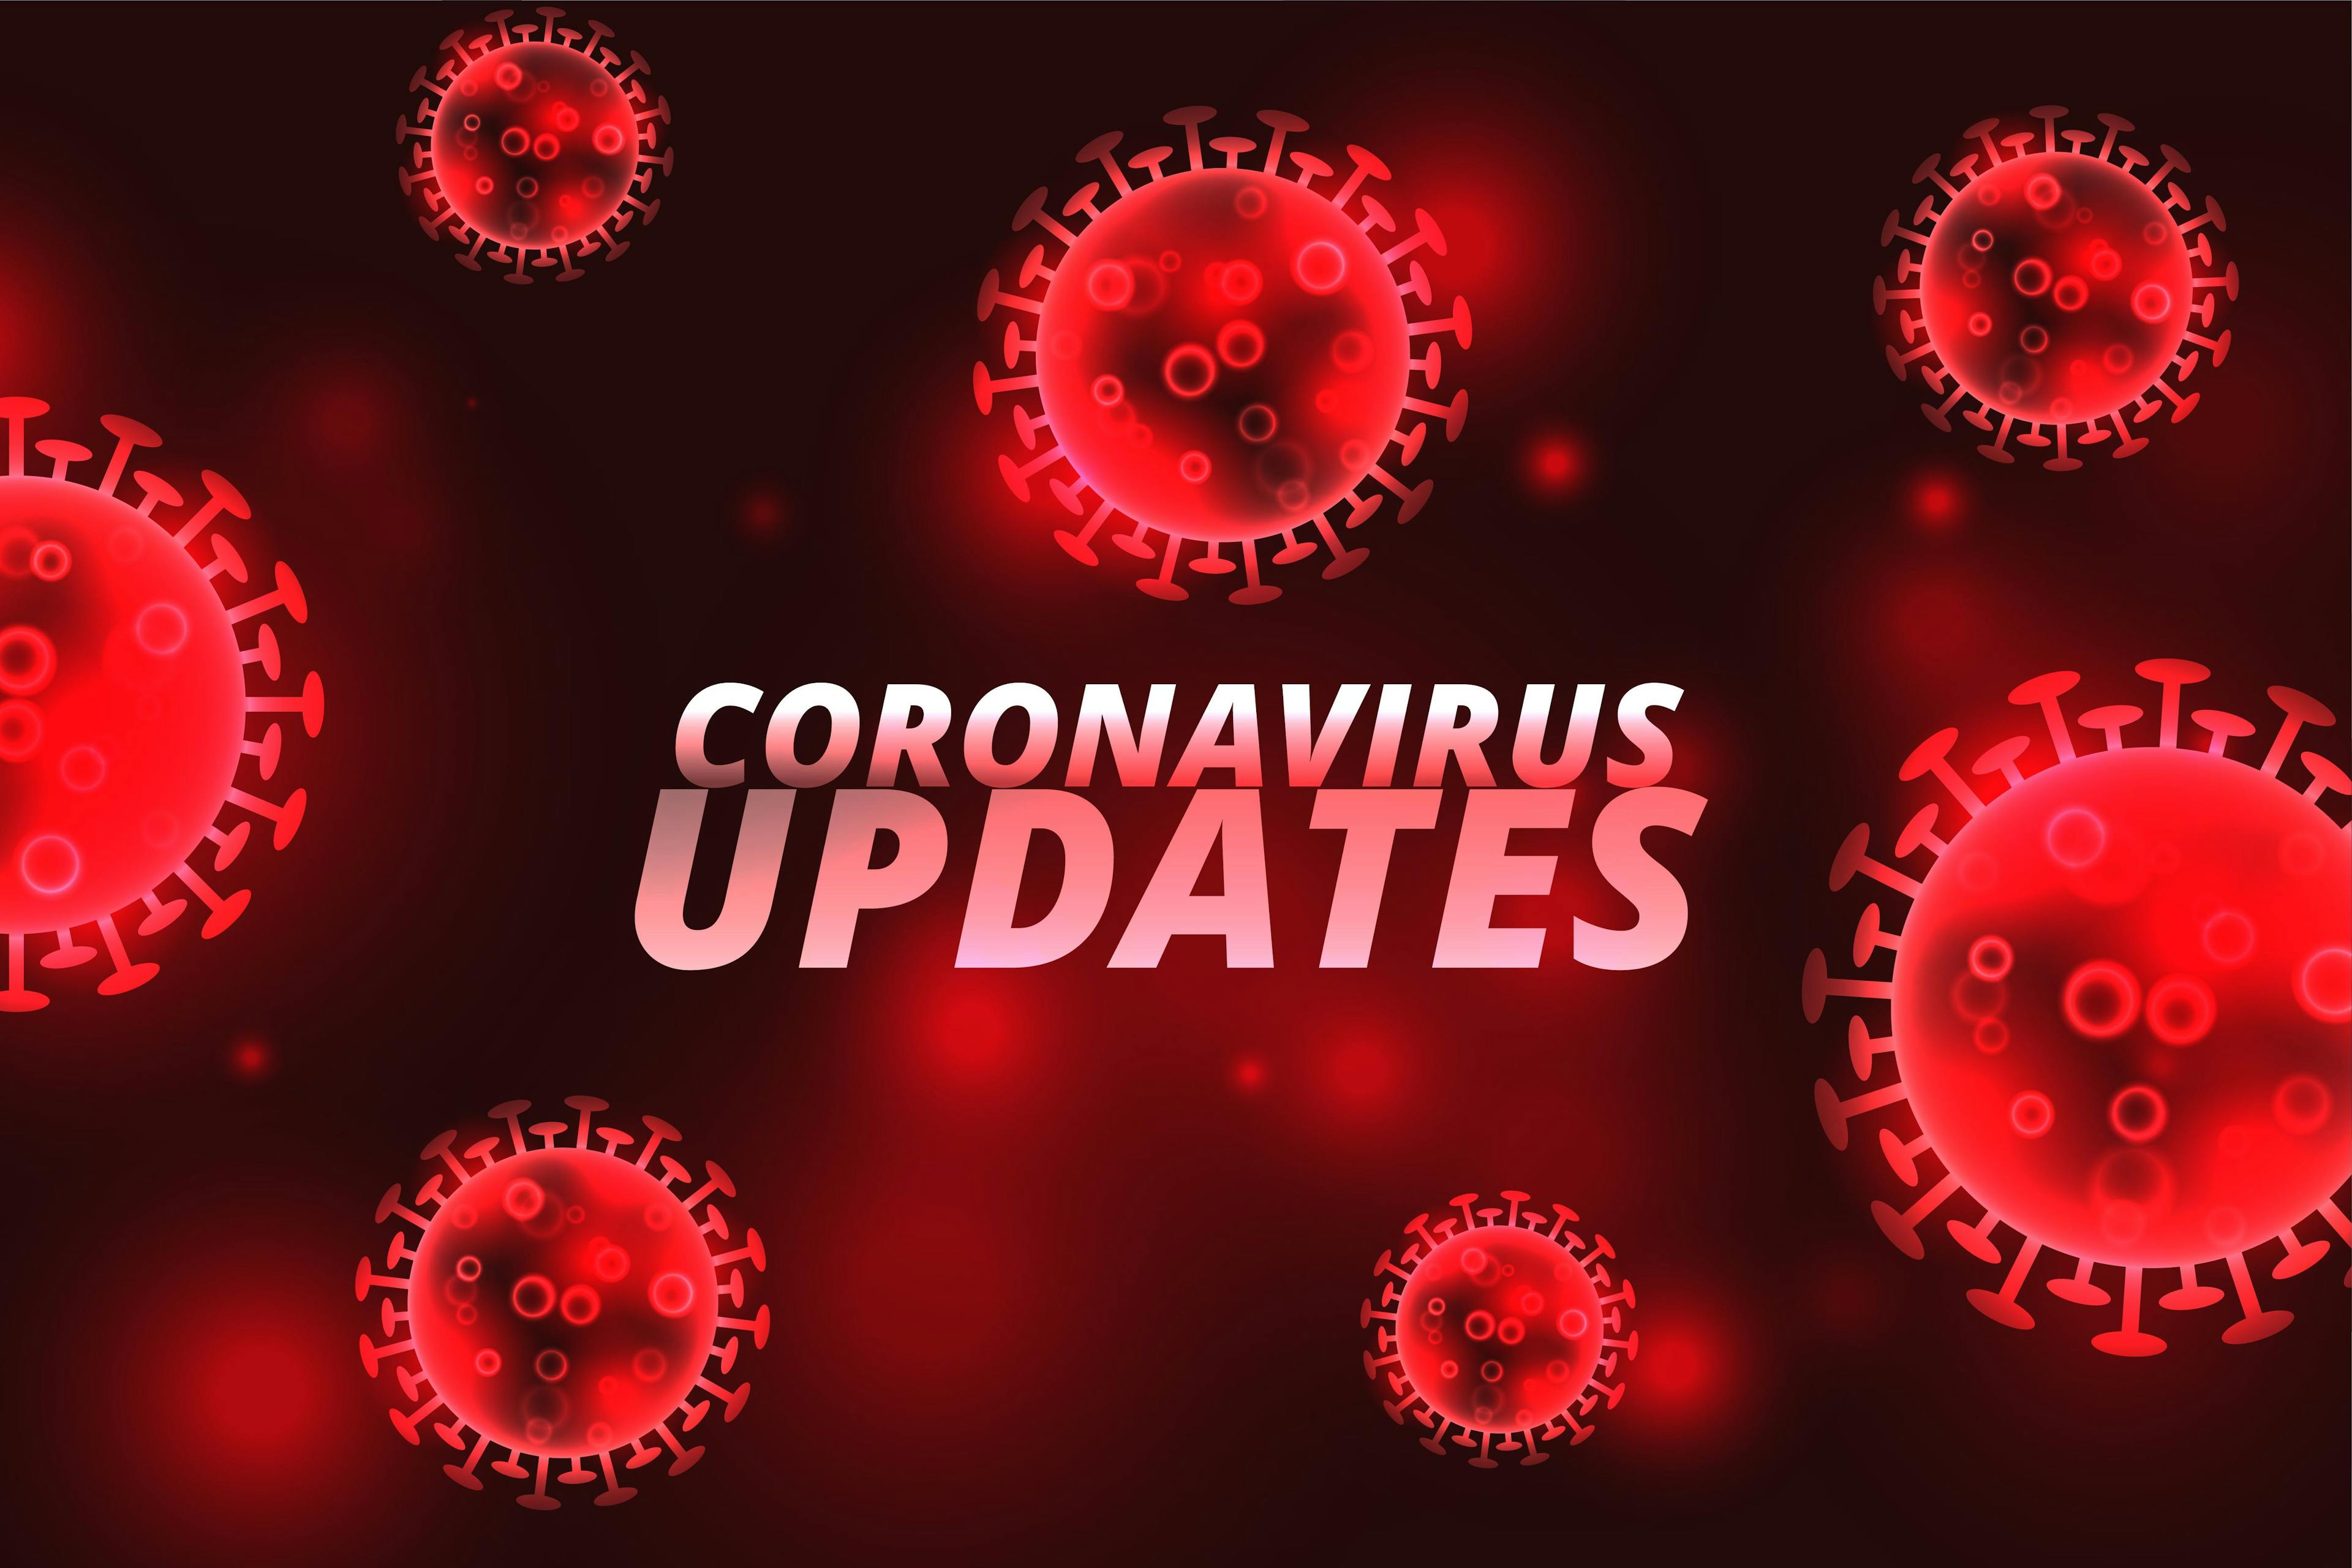 COVID-19 Updates: US Vaccinations and Global Cases and Deaths as of June 10, 2021